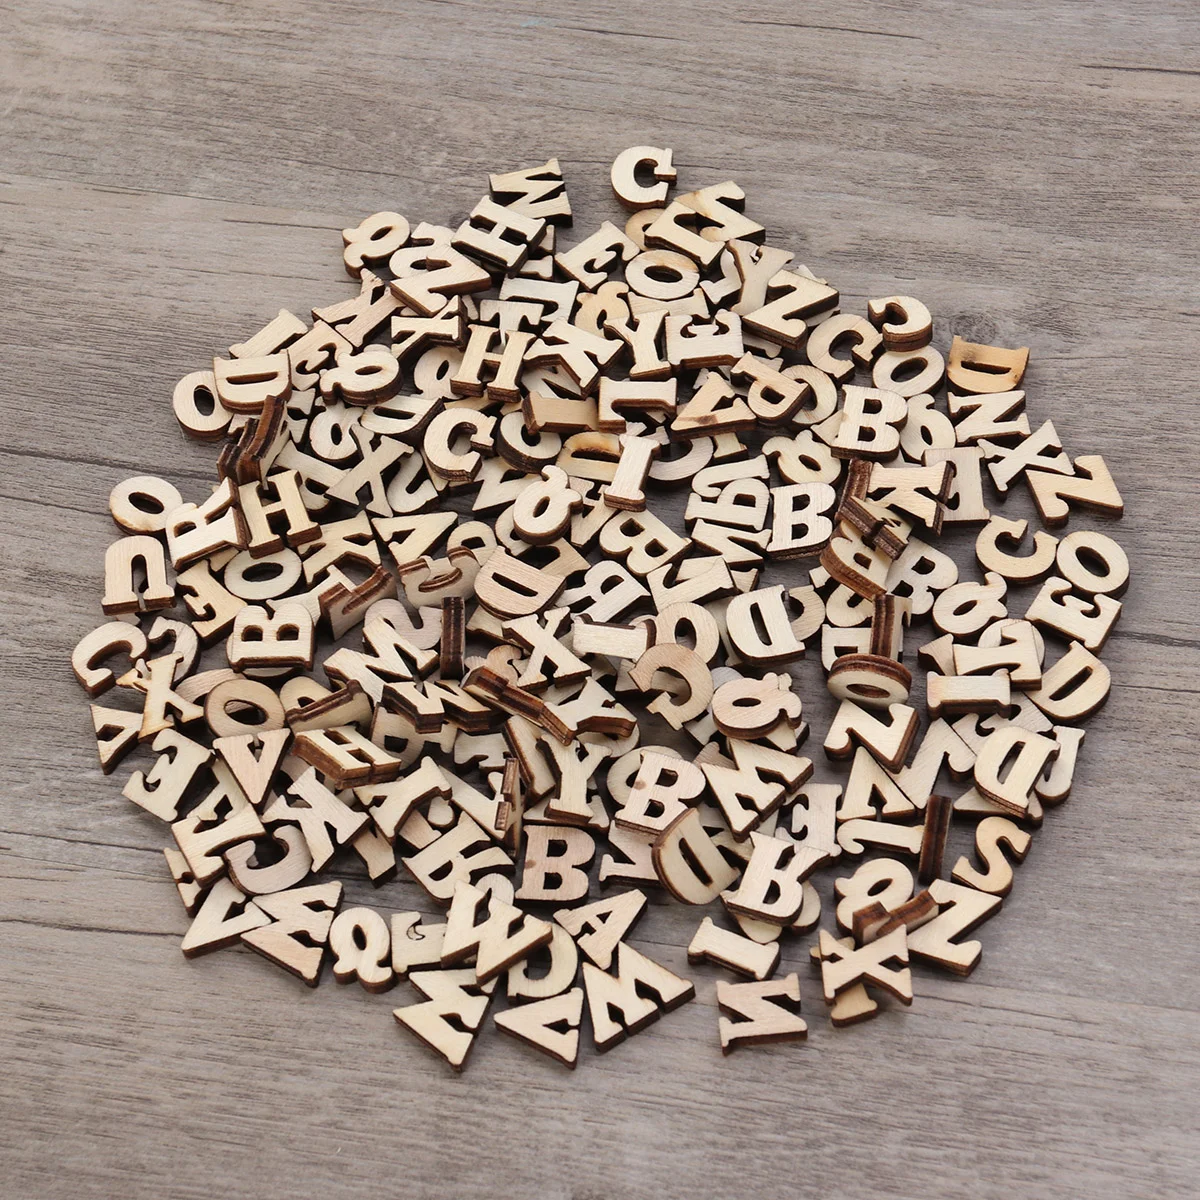 

Wooden Letters Wood Slicealphabet Crafts Craft Letter Embellishments Unfinishedchristmas Diy Mini Material Cutouts Decor Natural